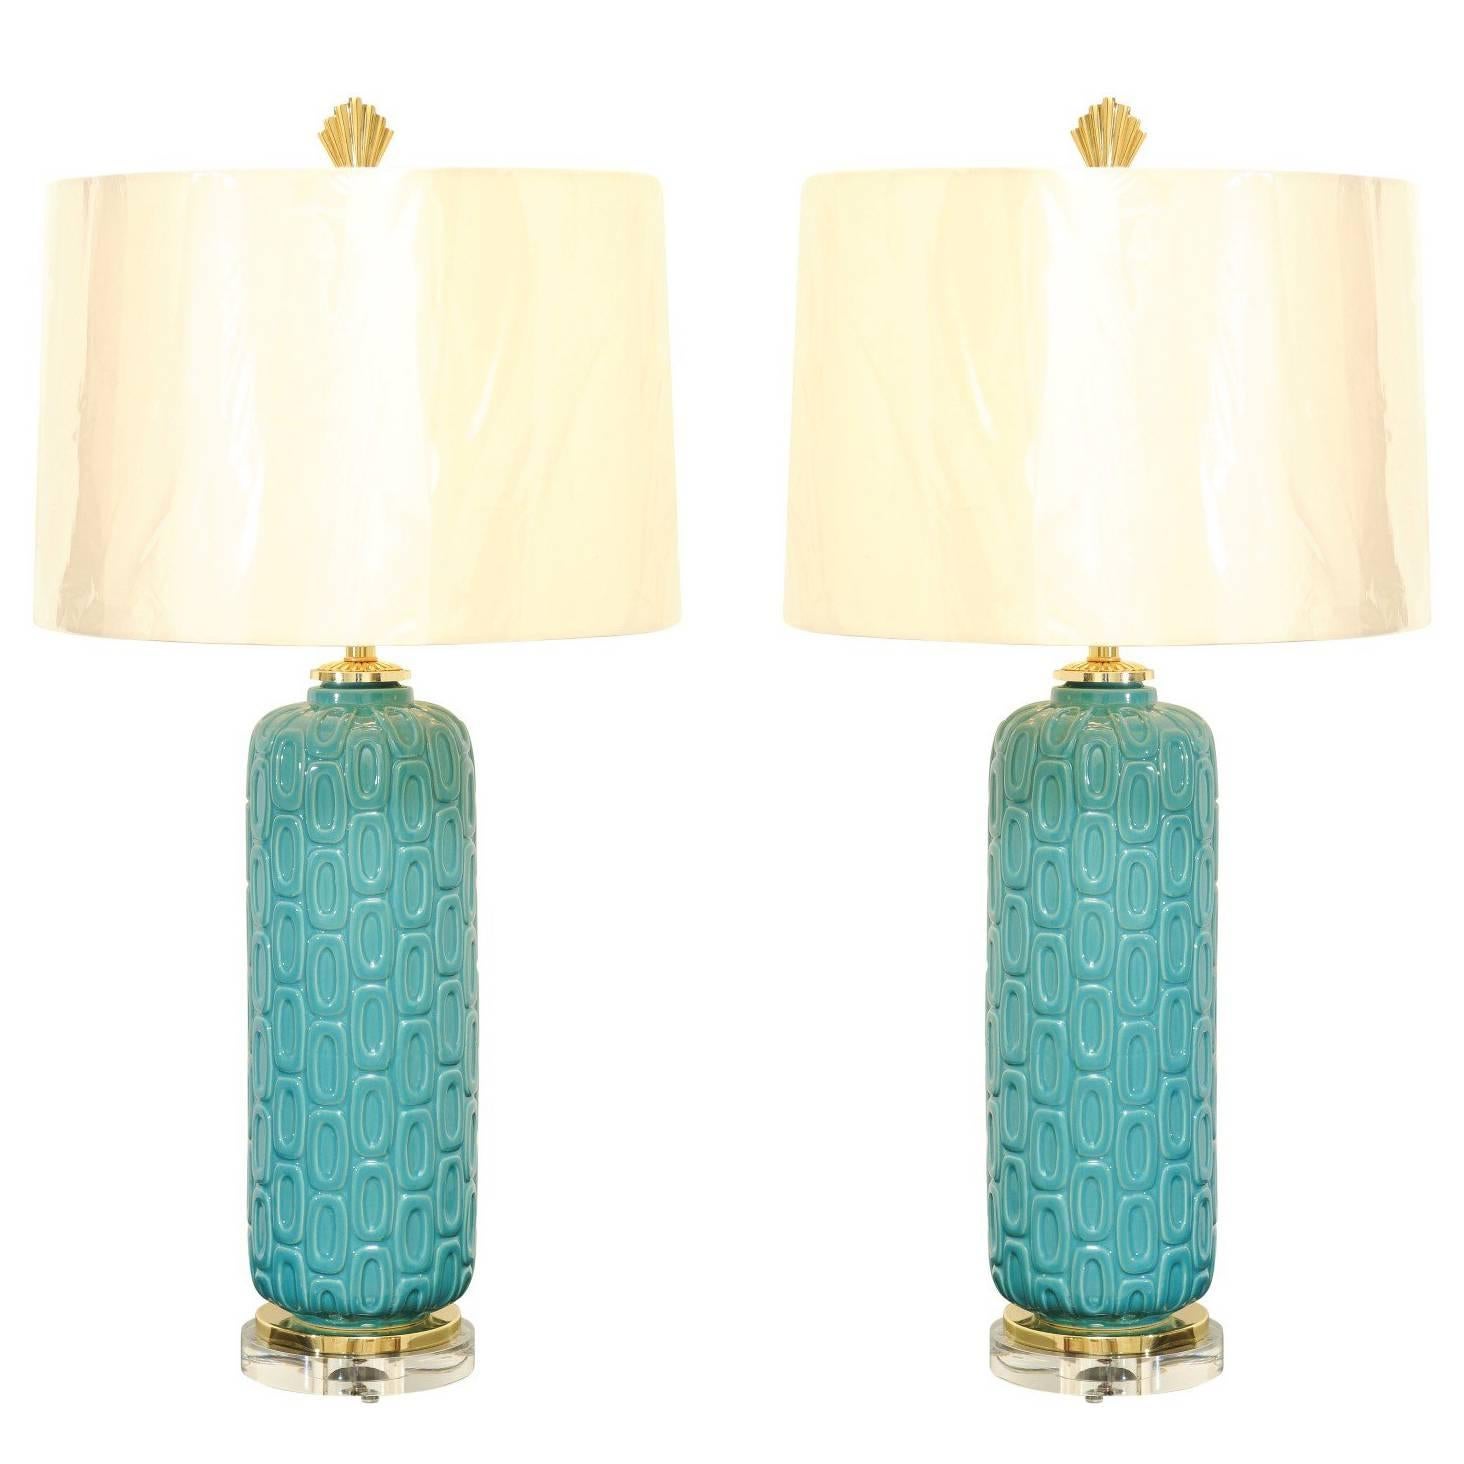 Stellar Restored Pair of Turquoise Ceramic Lamps with Brass and Lucite Accents